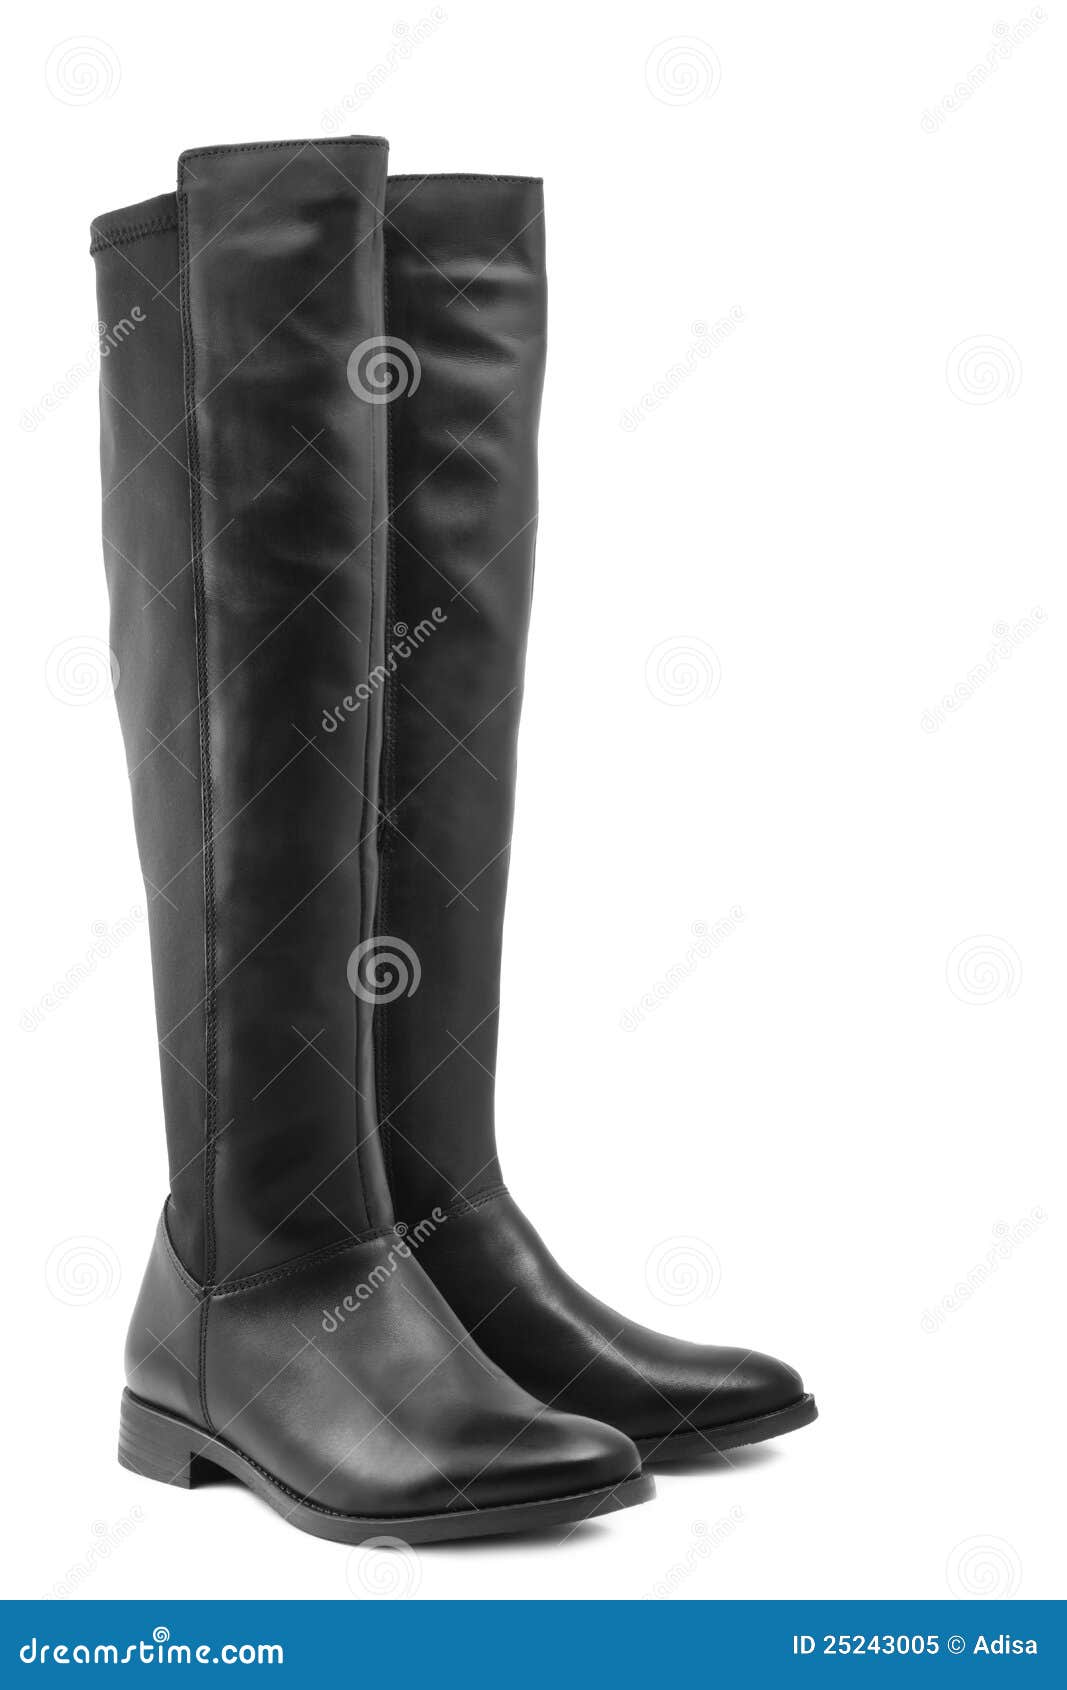 Black boots on white background